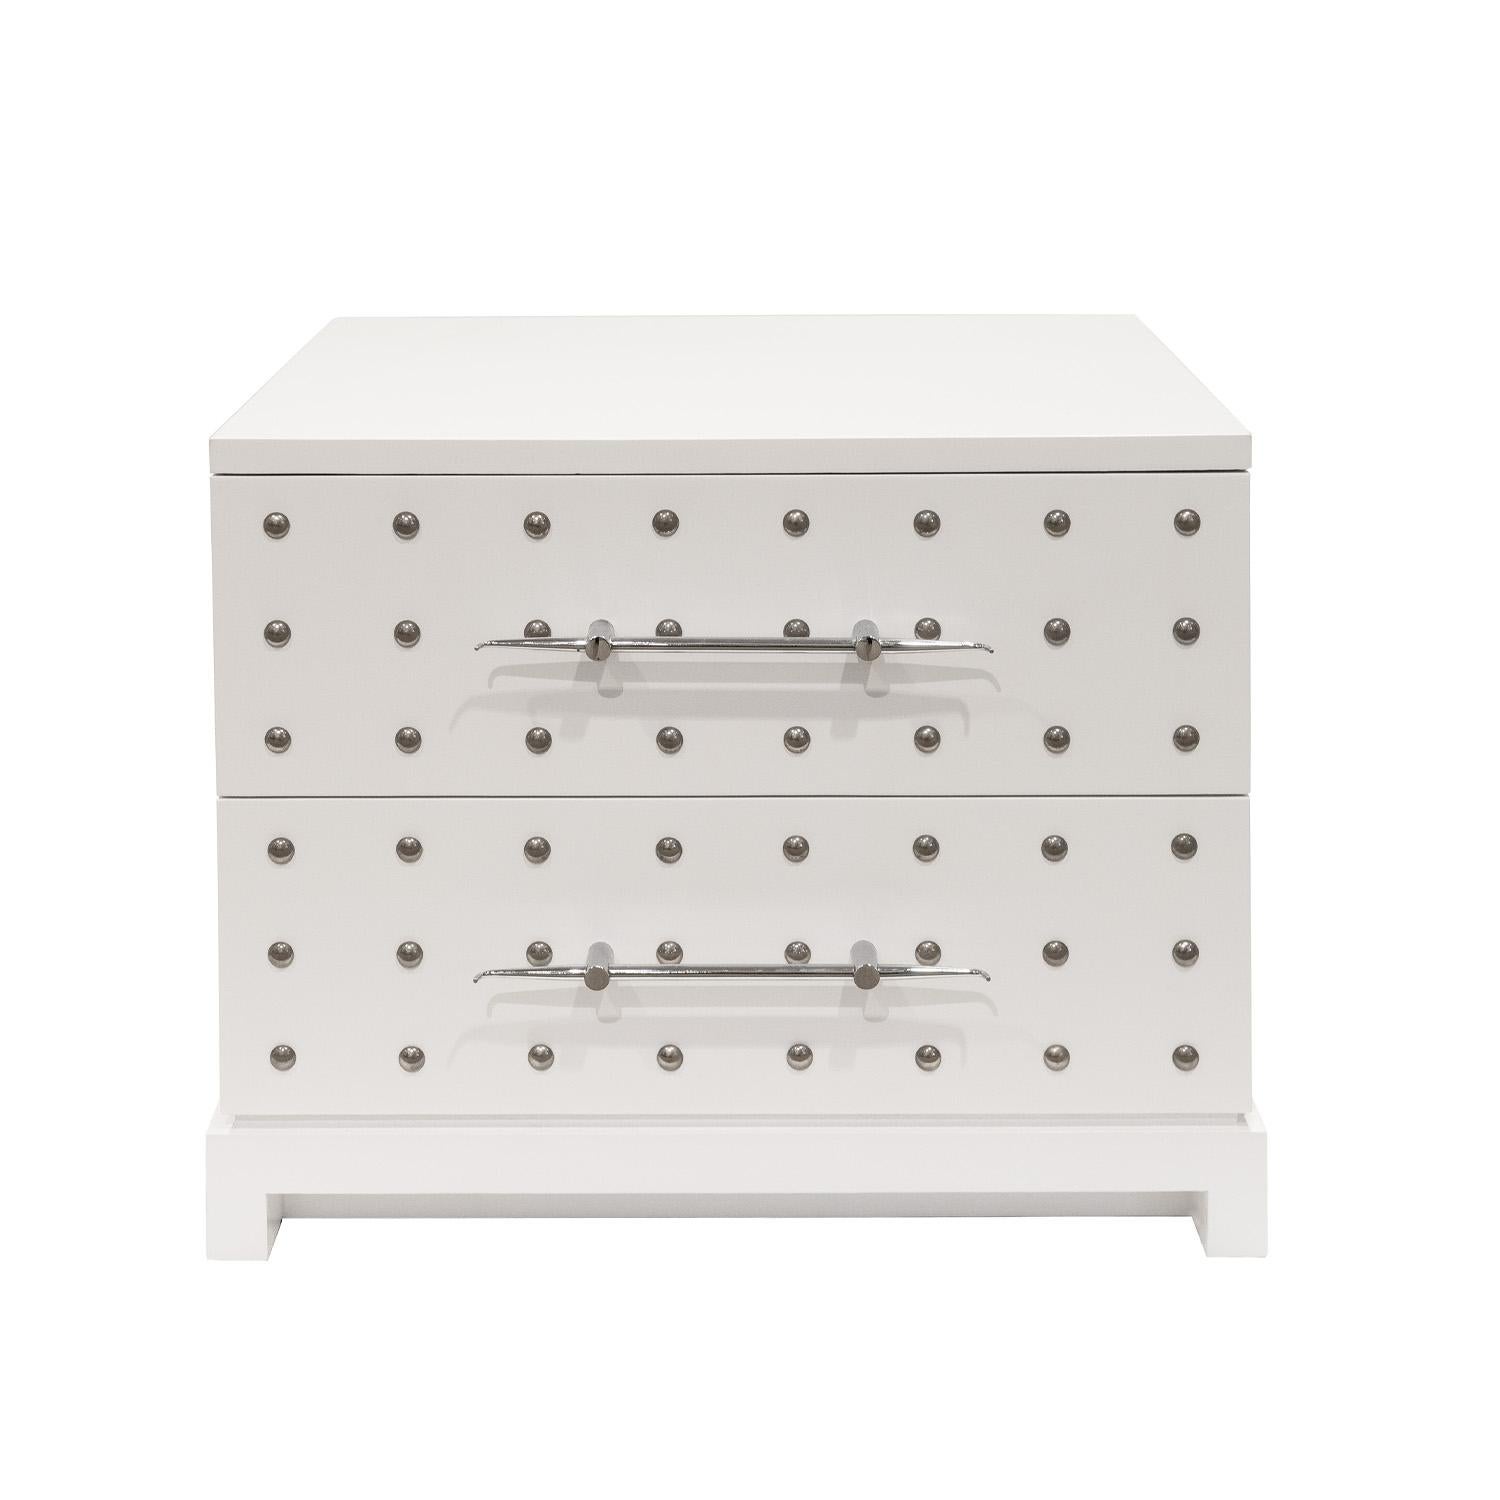 Small cabinet/chest/bedside table model 223S with 2 drawers in white lacquered mahogany with chrome studs and exquisite pulls by Tommi Parzinger for Parzinger Originals, American 1981.  This piece is a gem.  Beautifully crafted, it exudes Parzinger